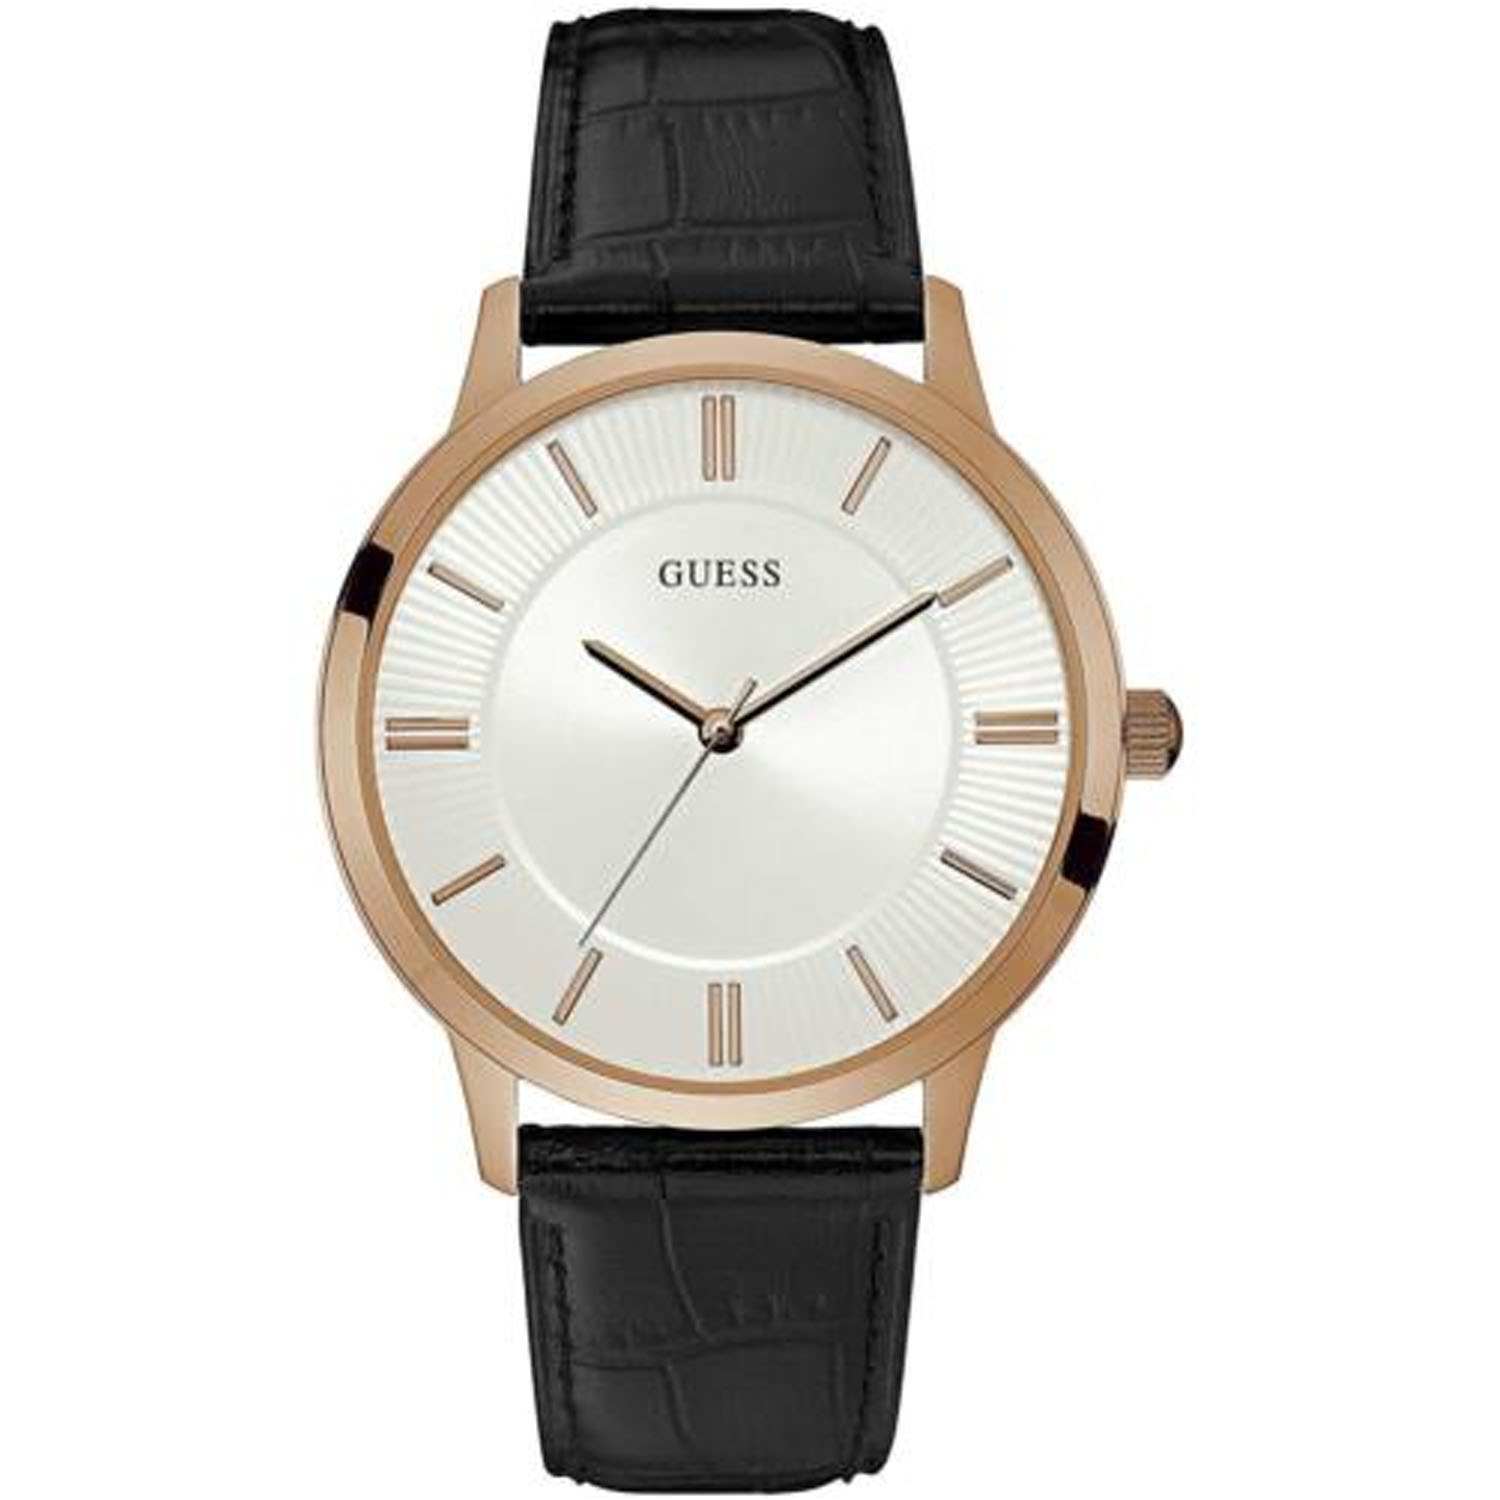 Guess Escrow Ladies Watch W0664G4